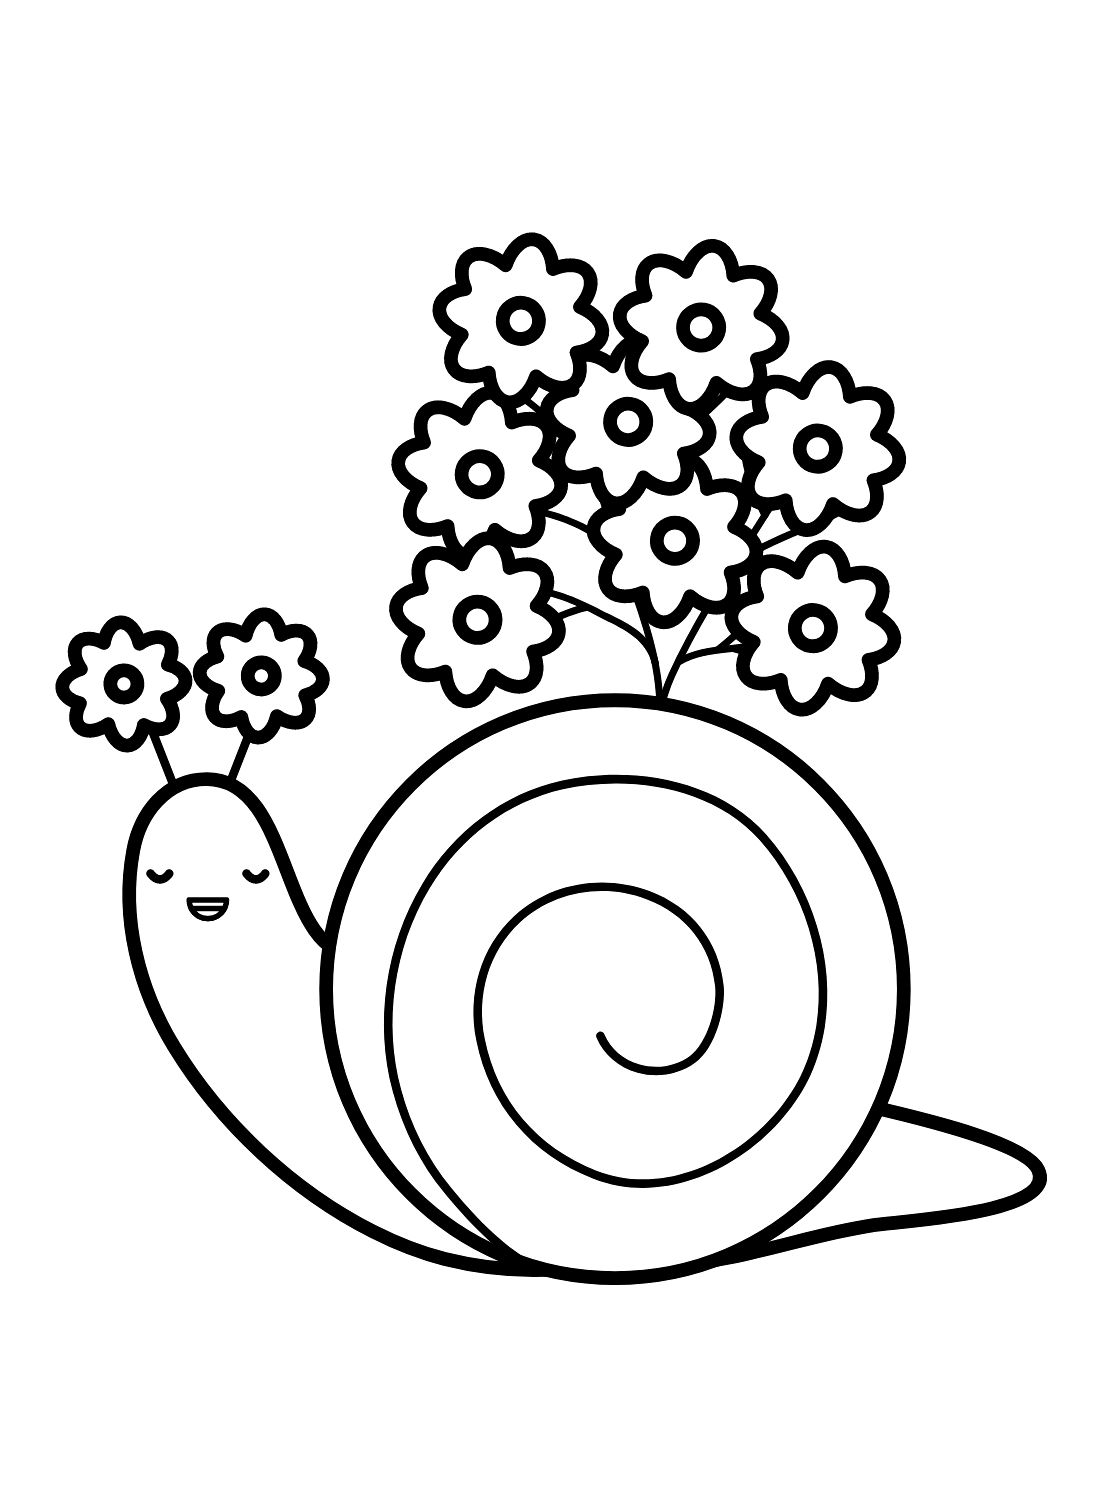 Caracol Fofo com Flores from Caracol